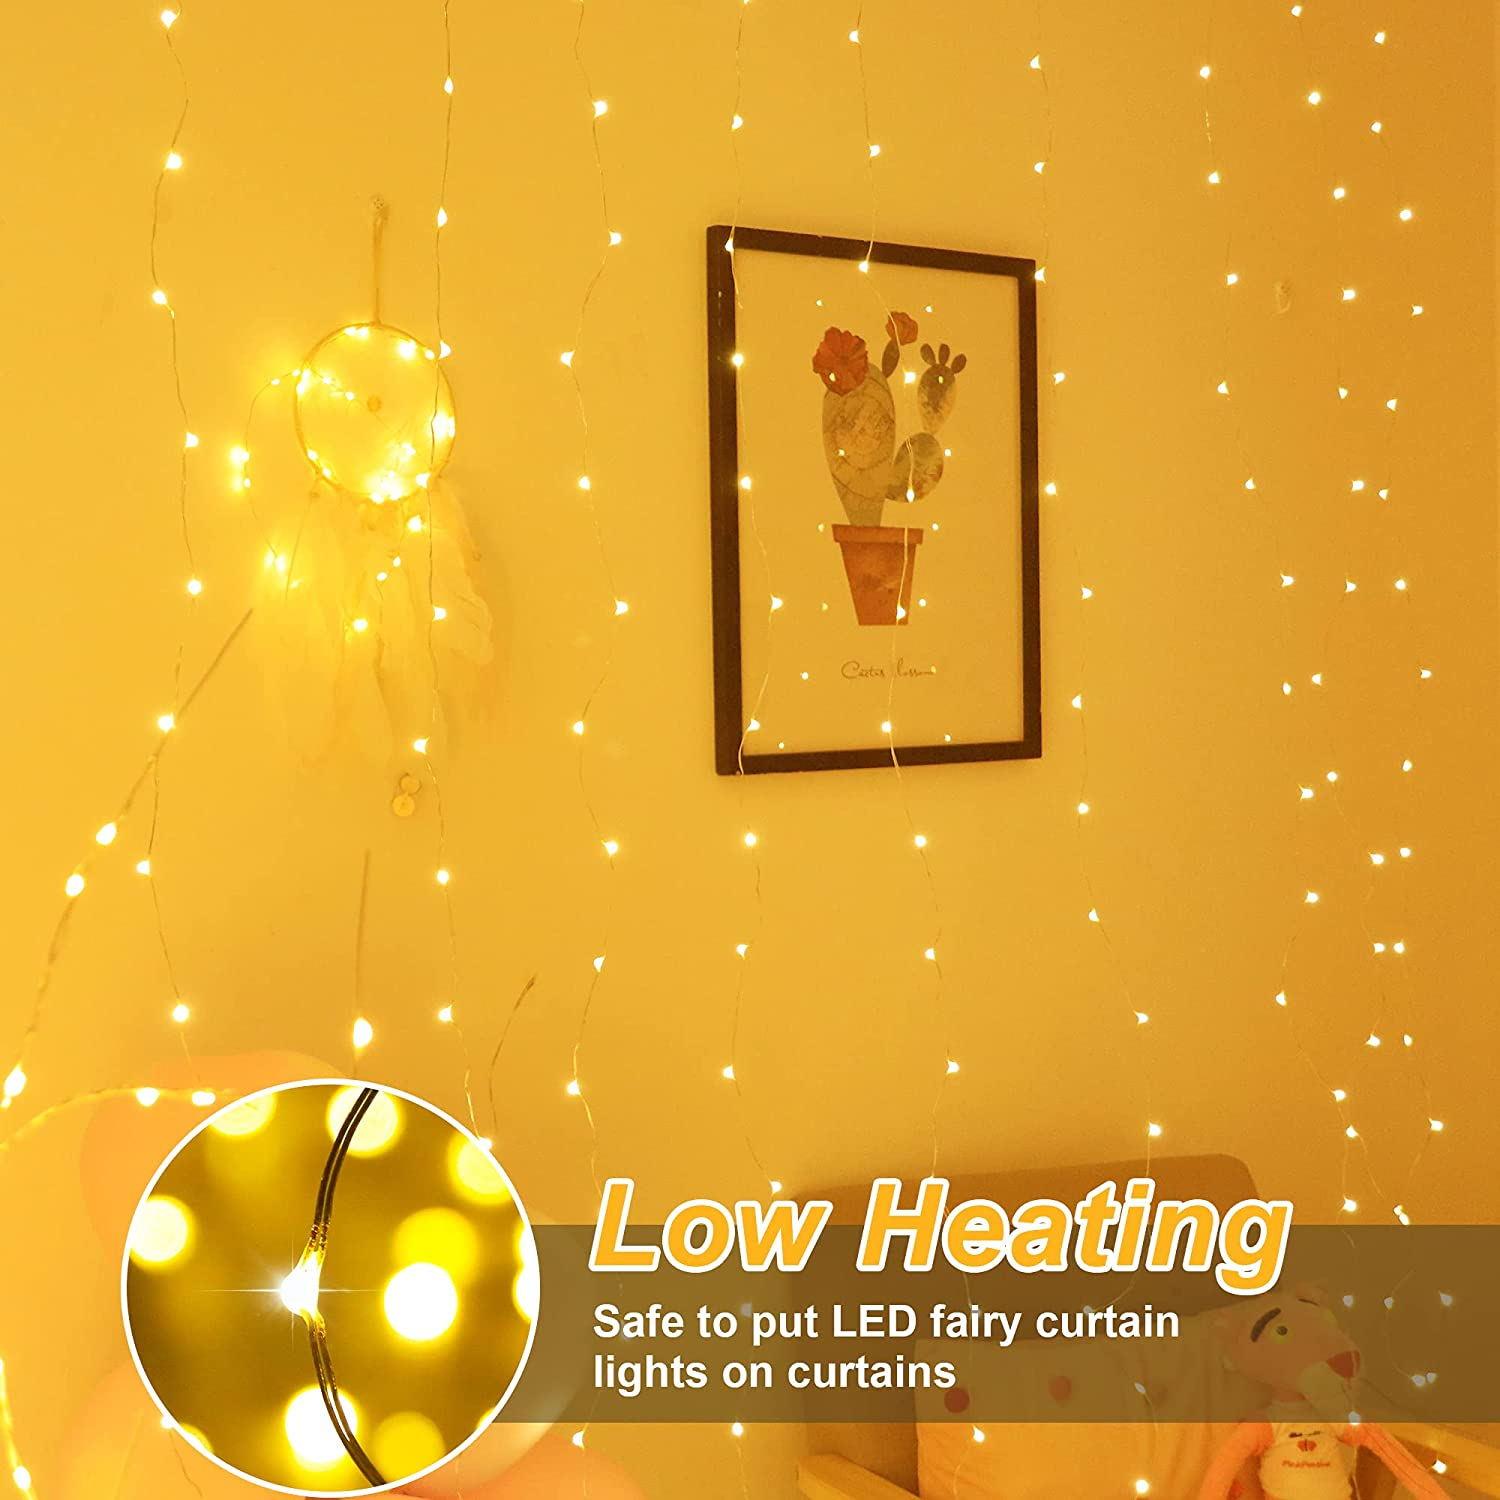 Curtain Fairy Lights 300 LED Remote Control 8 Lighting Modes USB Powered Waterproof String Light for Indoor Bedroom Outdoor Ho